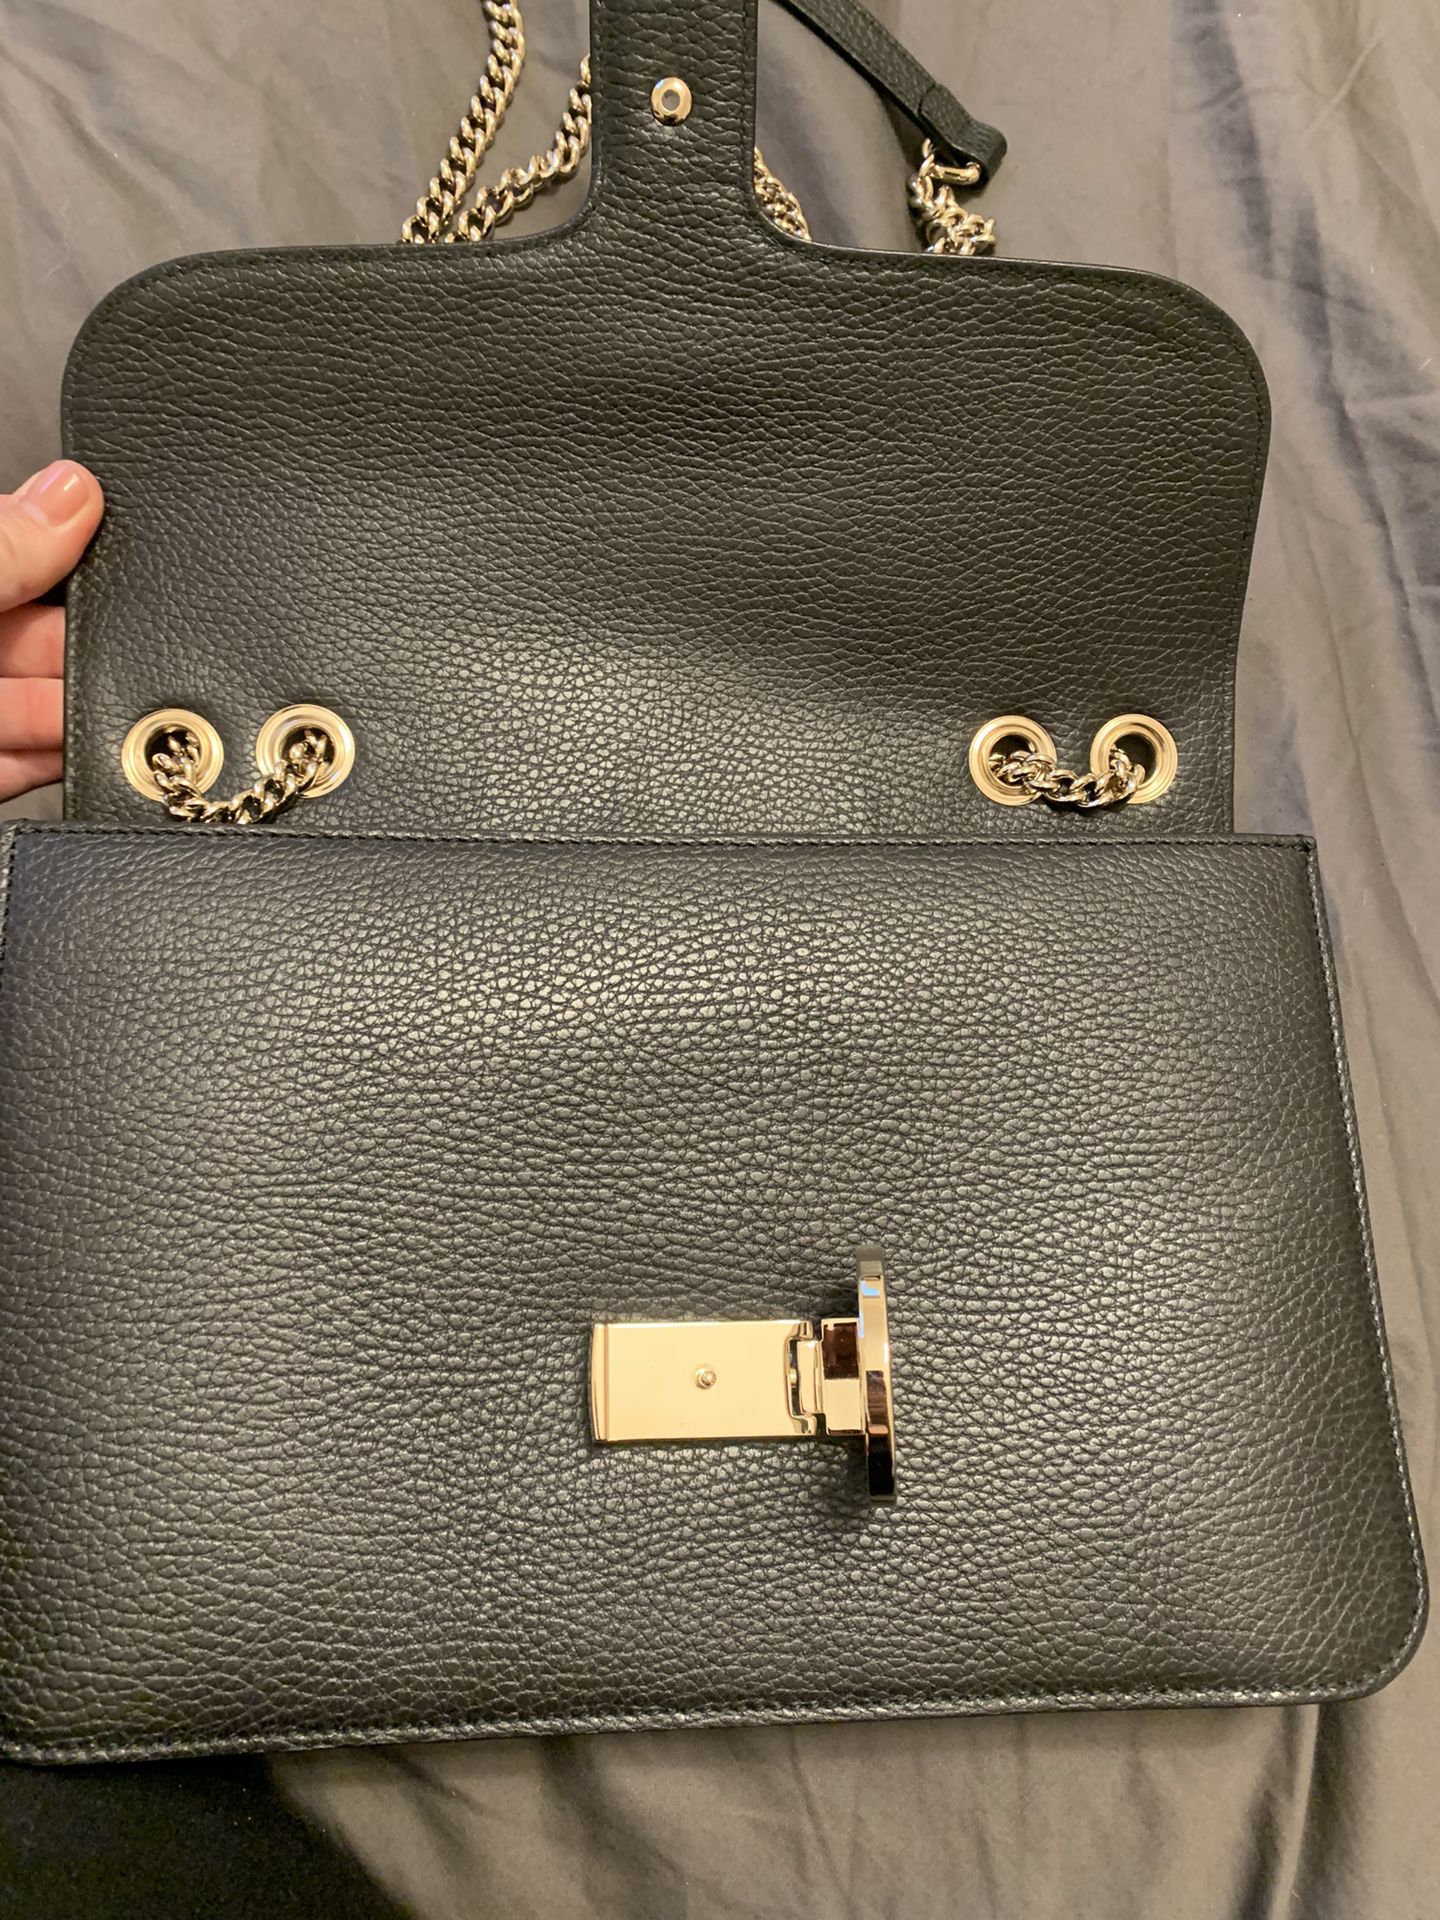 Gucci Authentic Empty Shoe Box for Sale in Mineola, NY - OfferUp